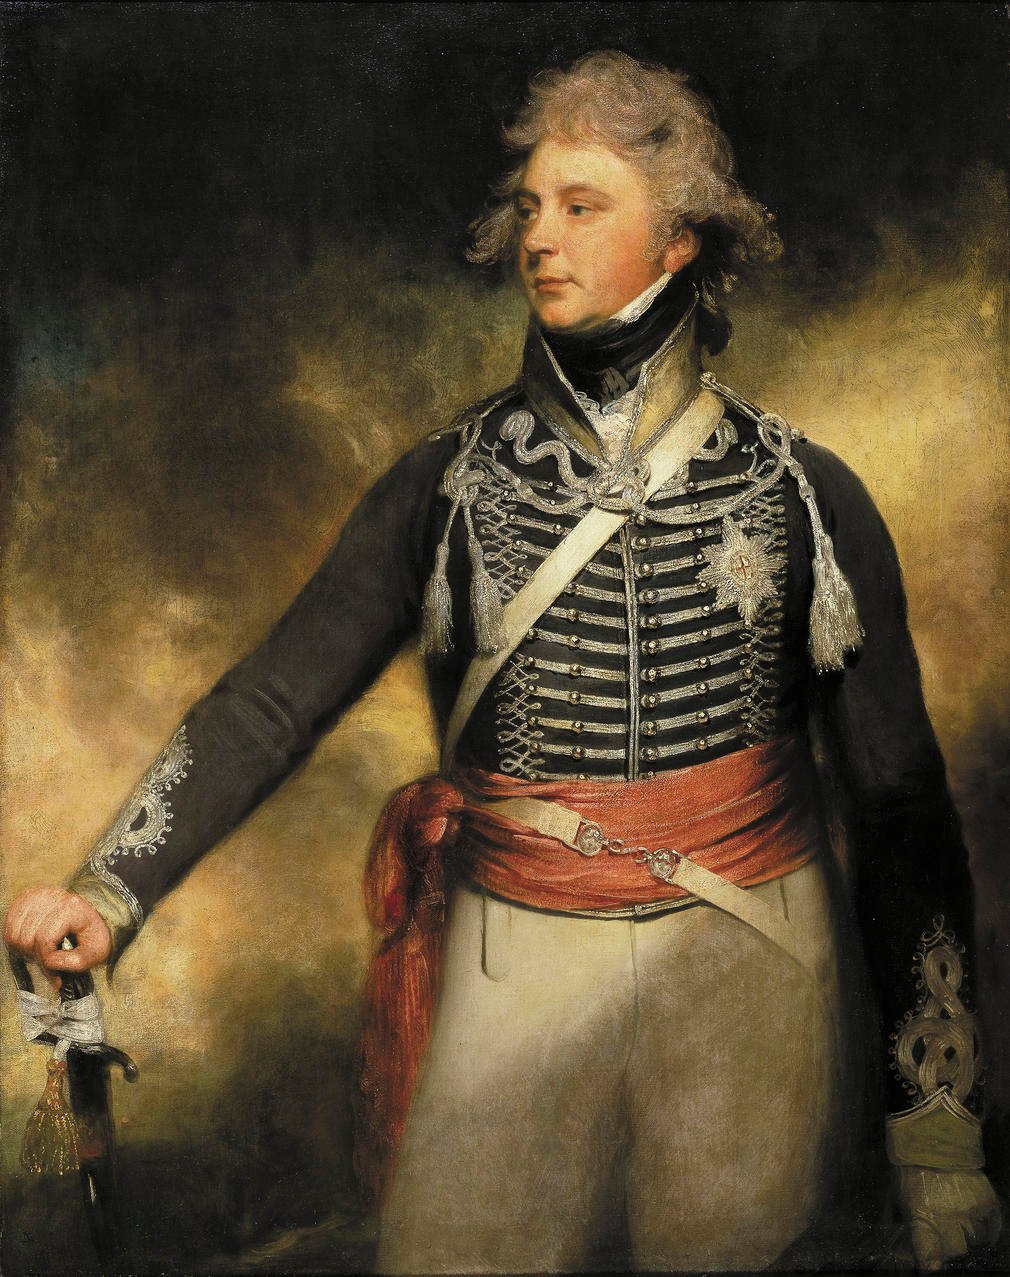 Portrait of George, Prince of Wales (future King George IV) by William Beechey